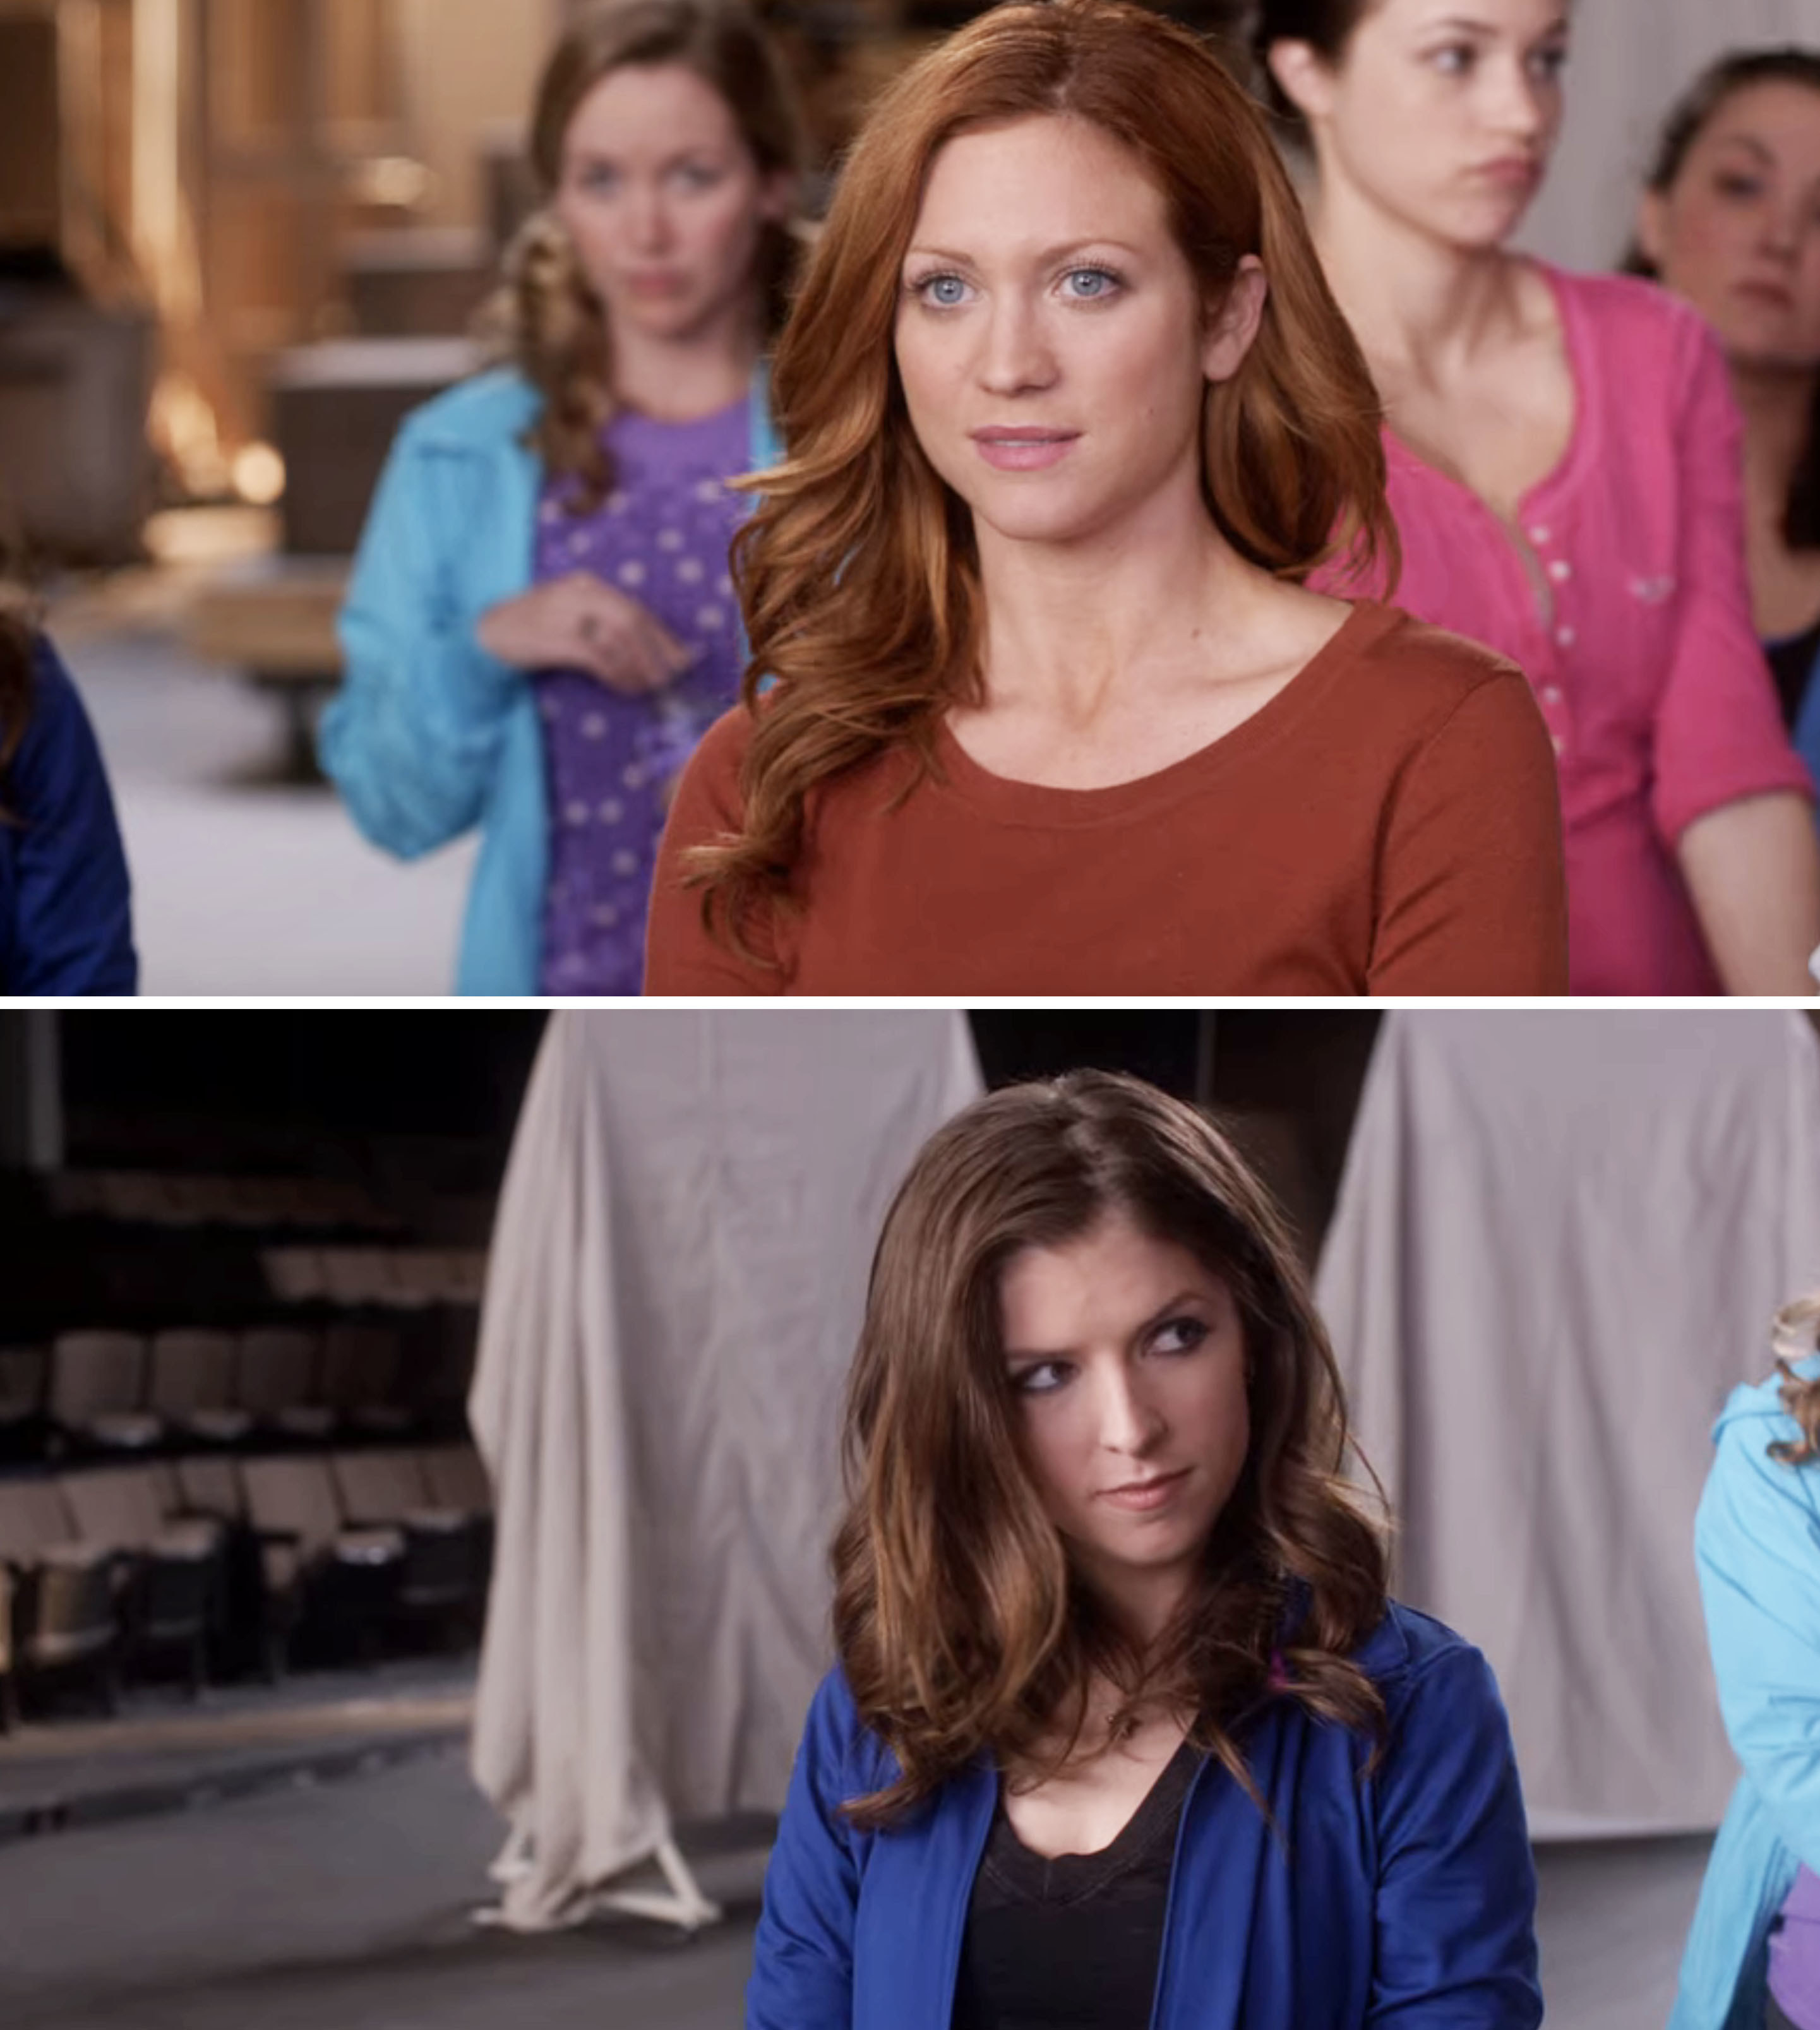 Screenshots of Chloe and Beca in &quot;Pitch Perfect&quot;